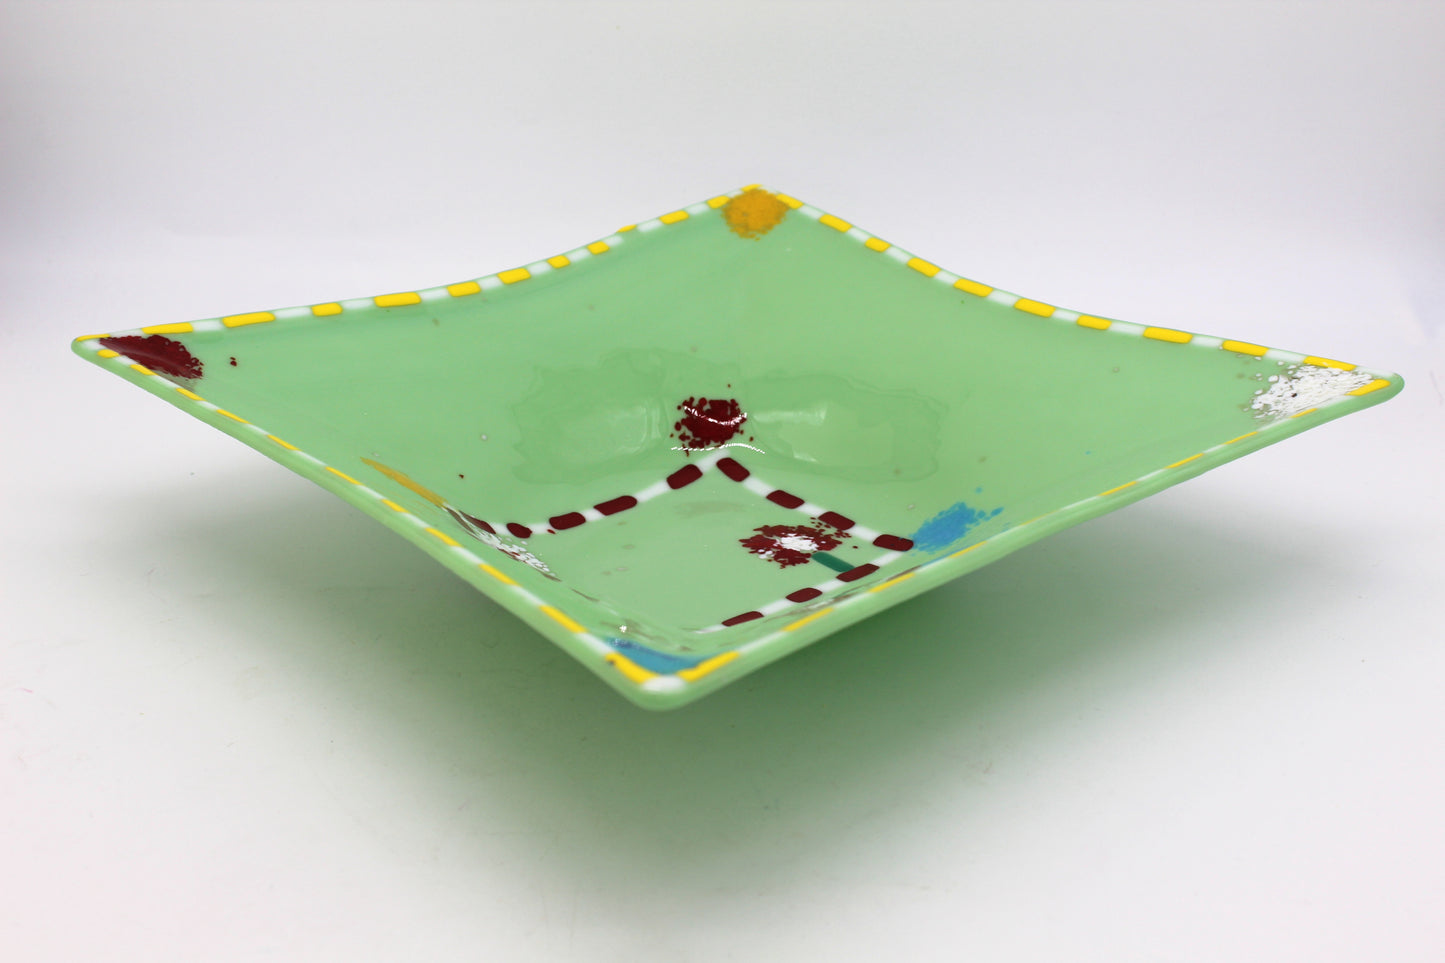 This is green fused glass with a yellow and white border, with splatters of color in each corner. COlors include yellow, burgundy, blue and white